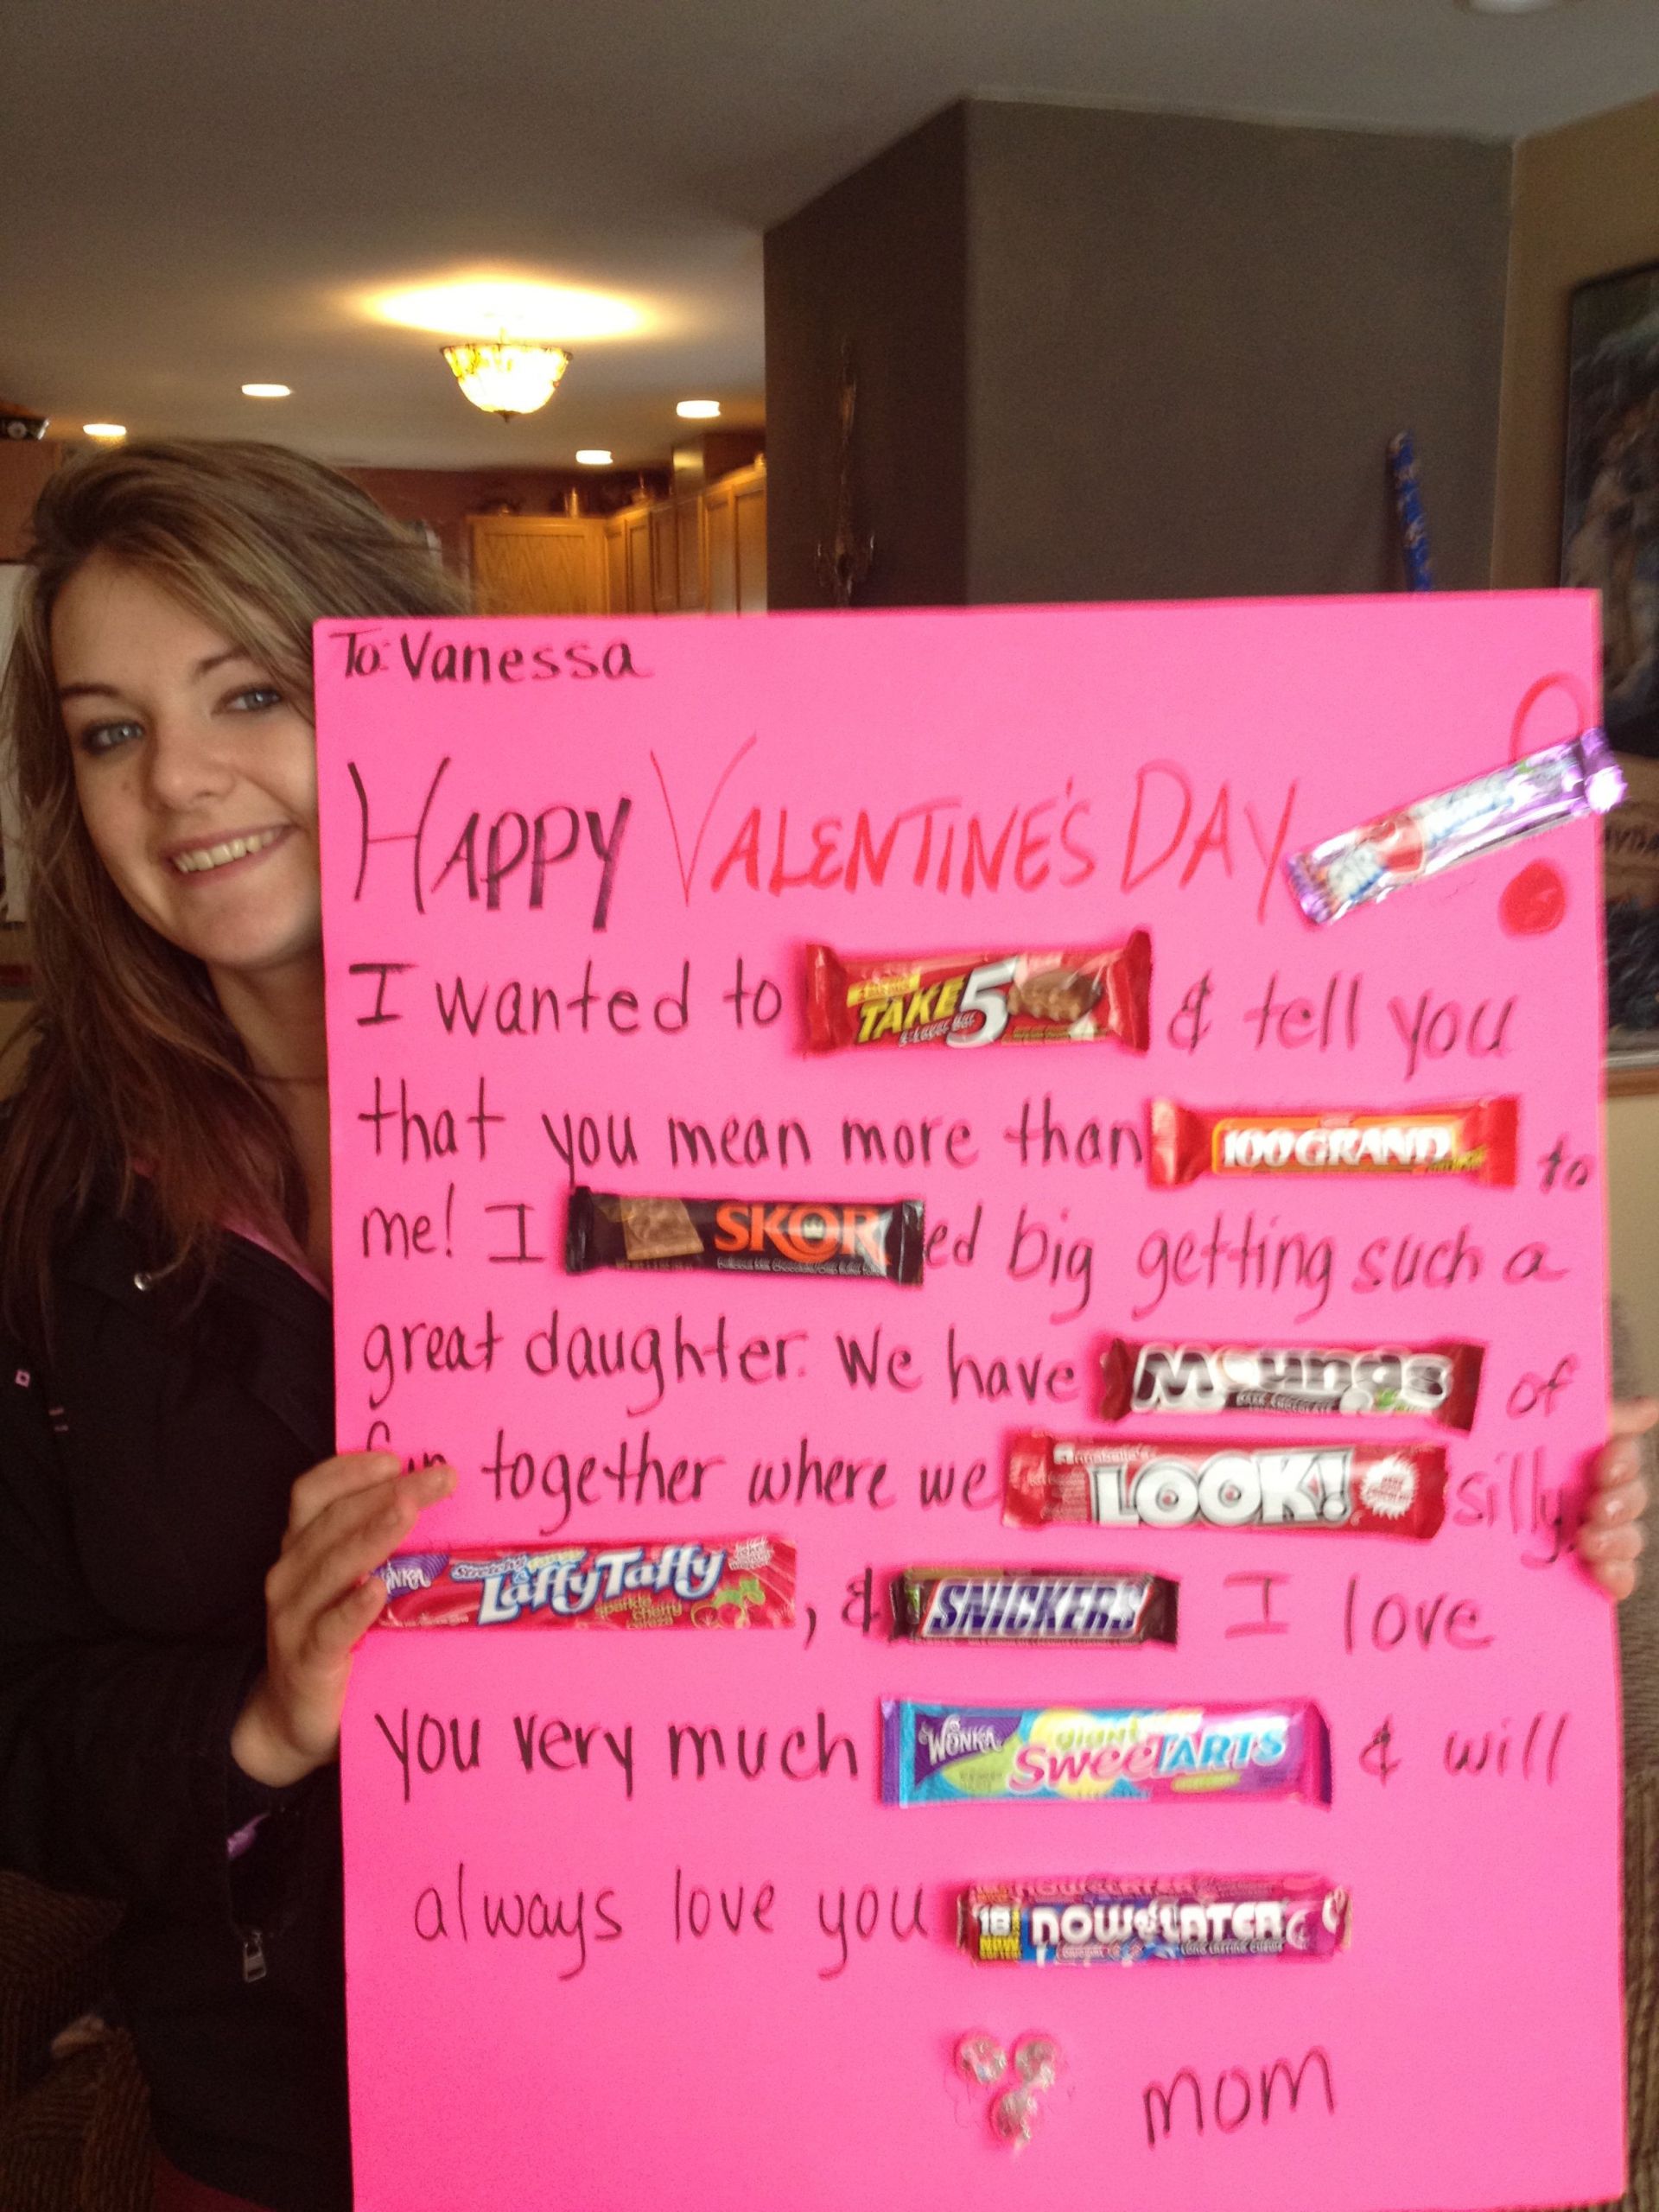 Valentines Gift Ideas For Young Daughter
 Made this cute candy bar poster for my daughter for